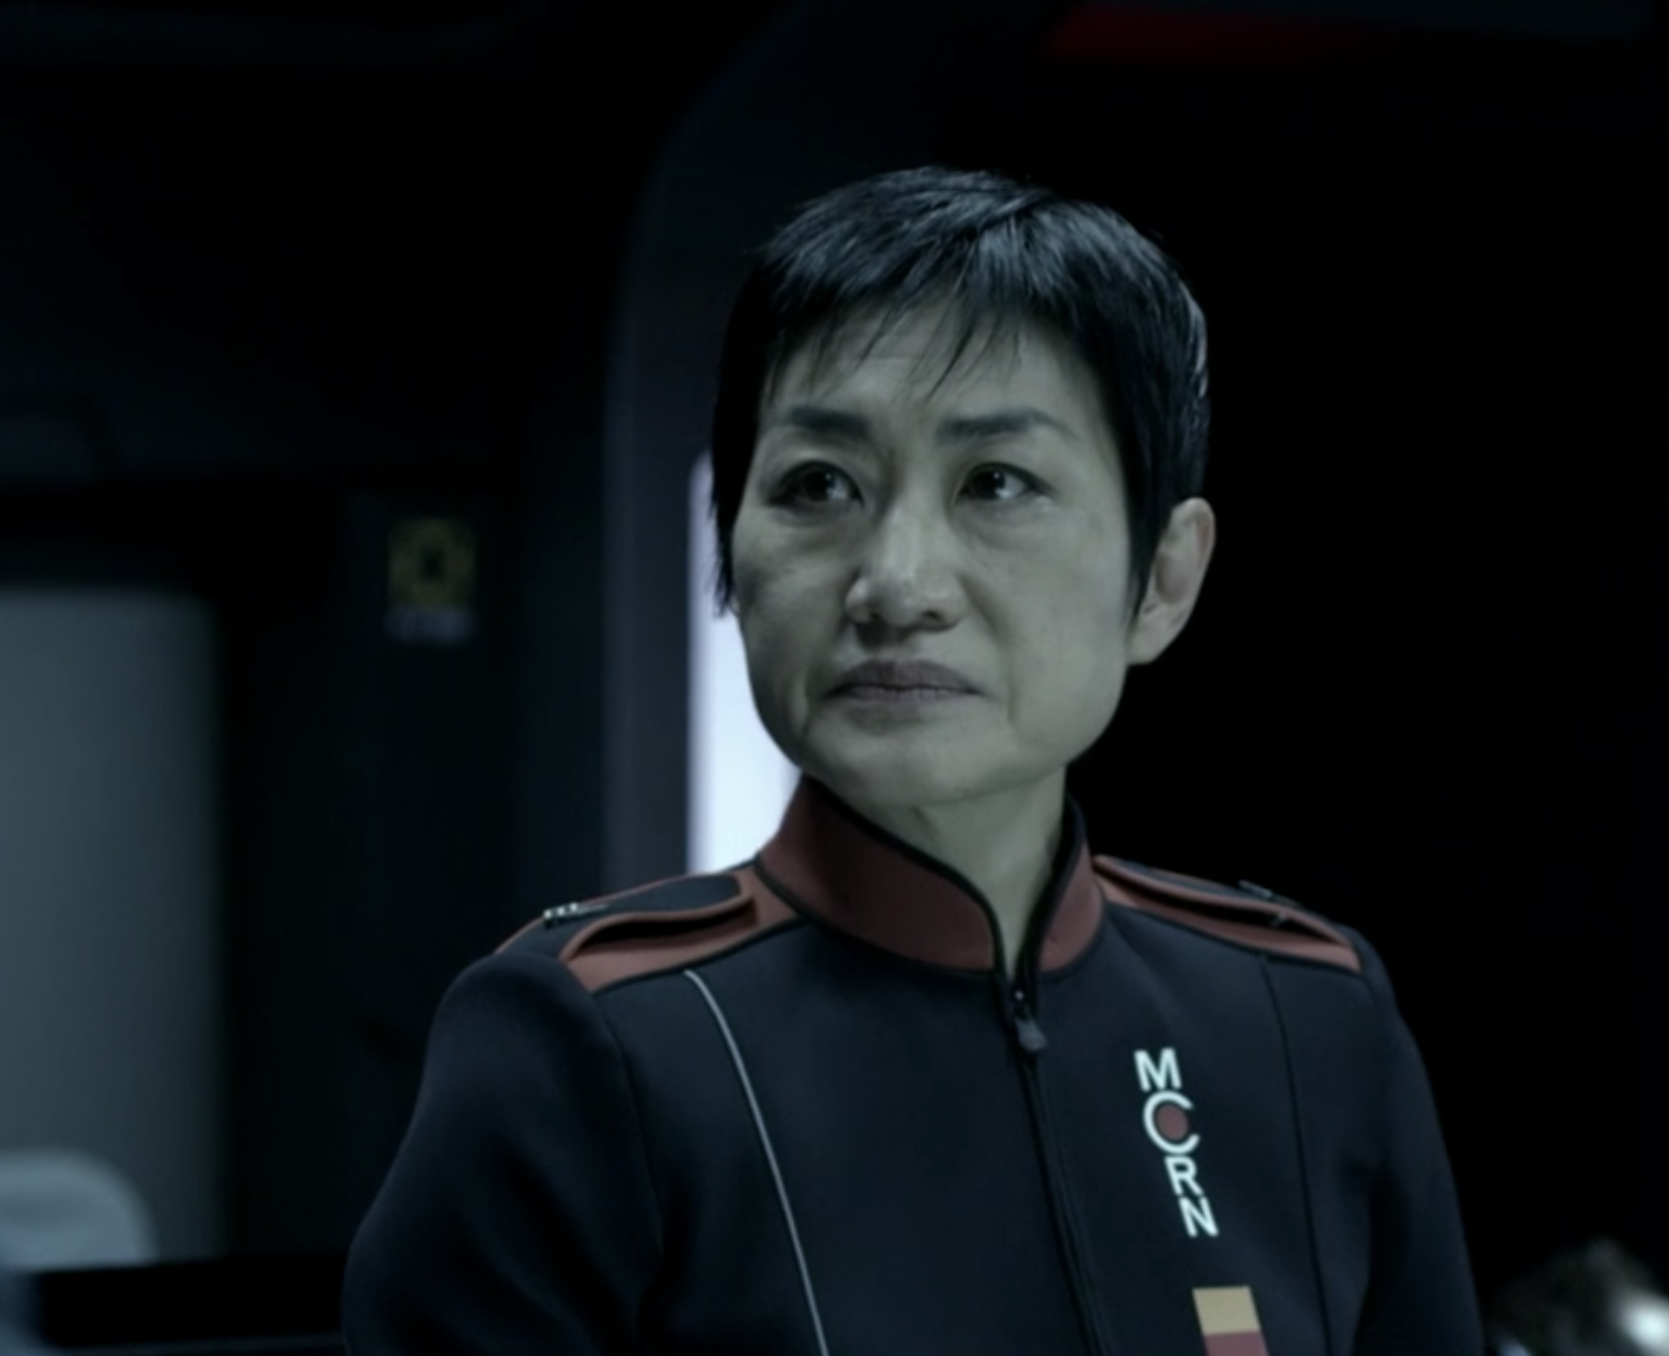 I love the Martian military uniforms in The Expanse